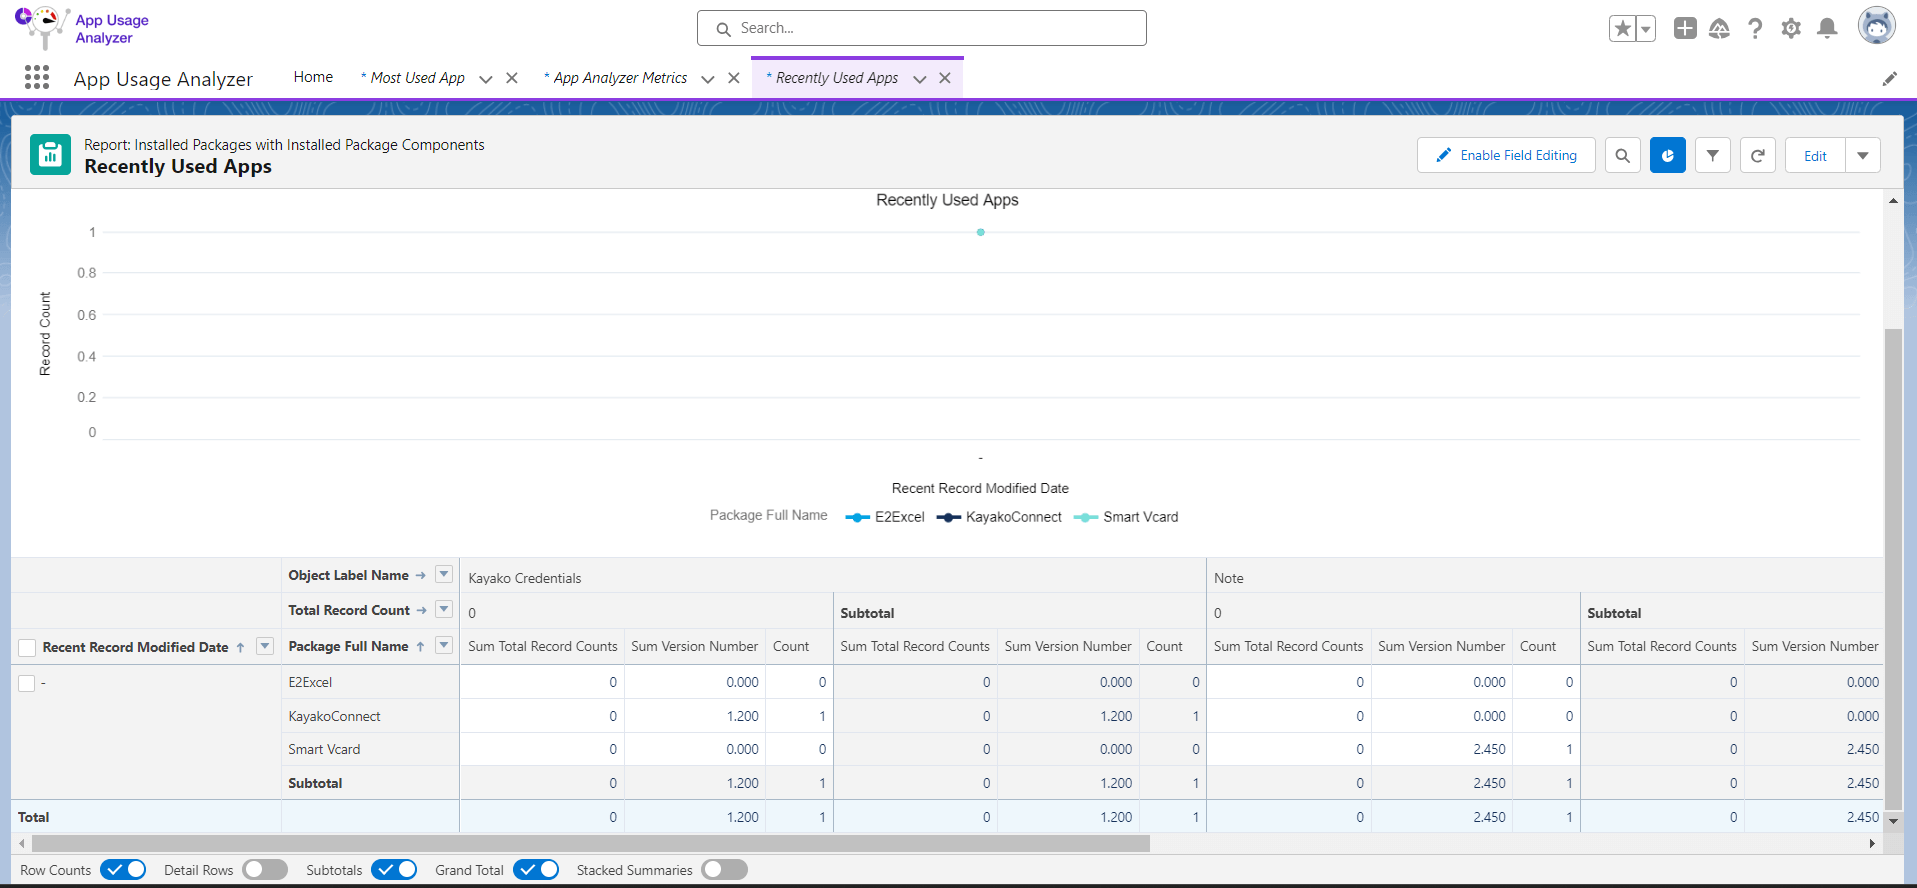 Customizable Reports and Dashboards